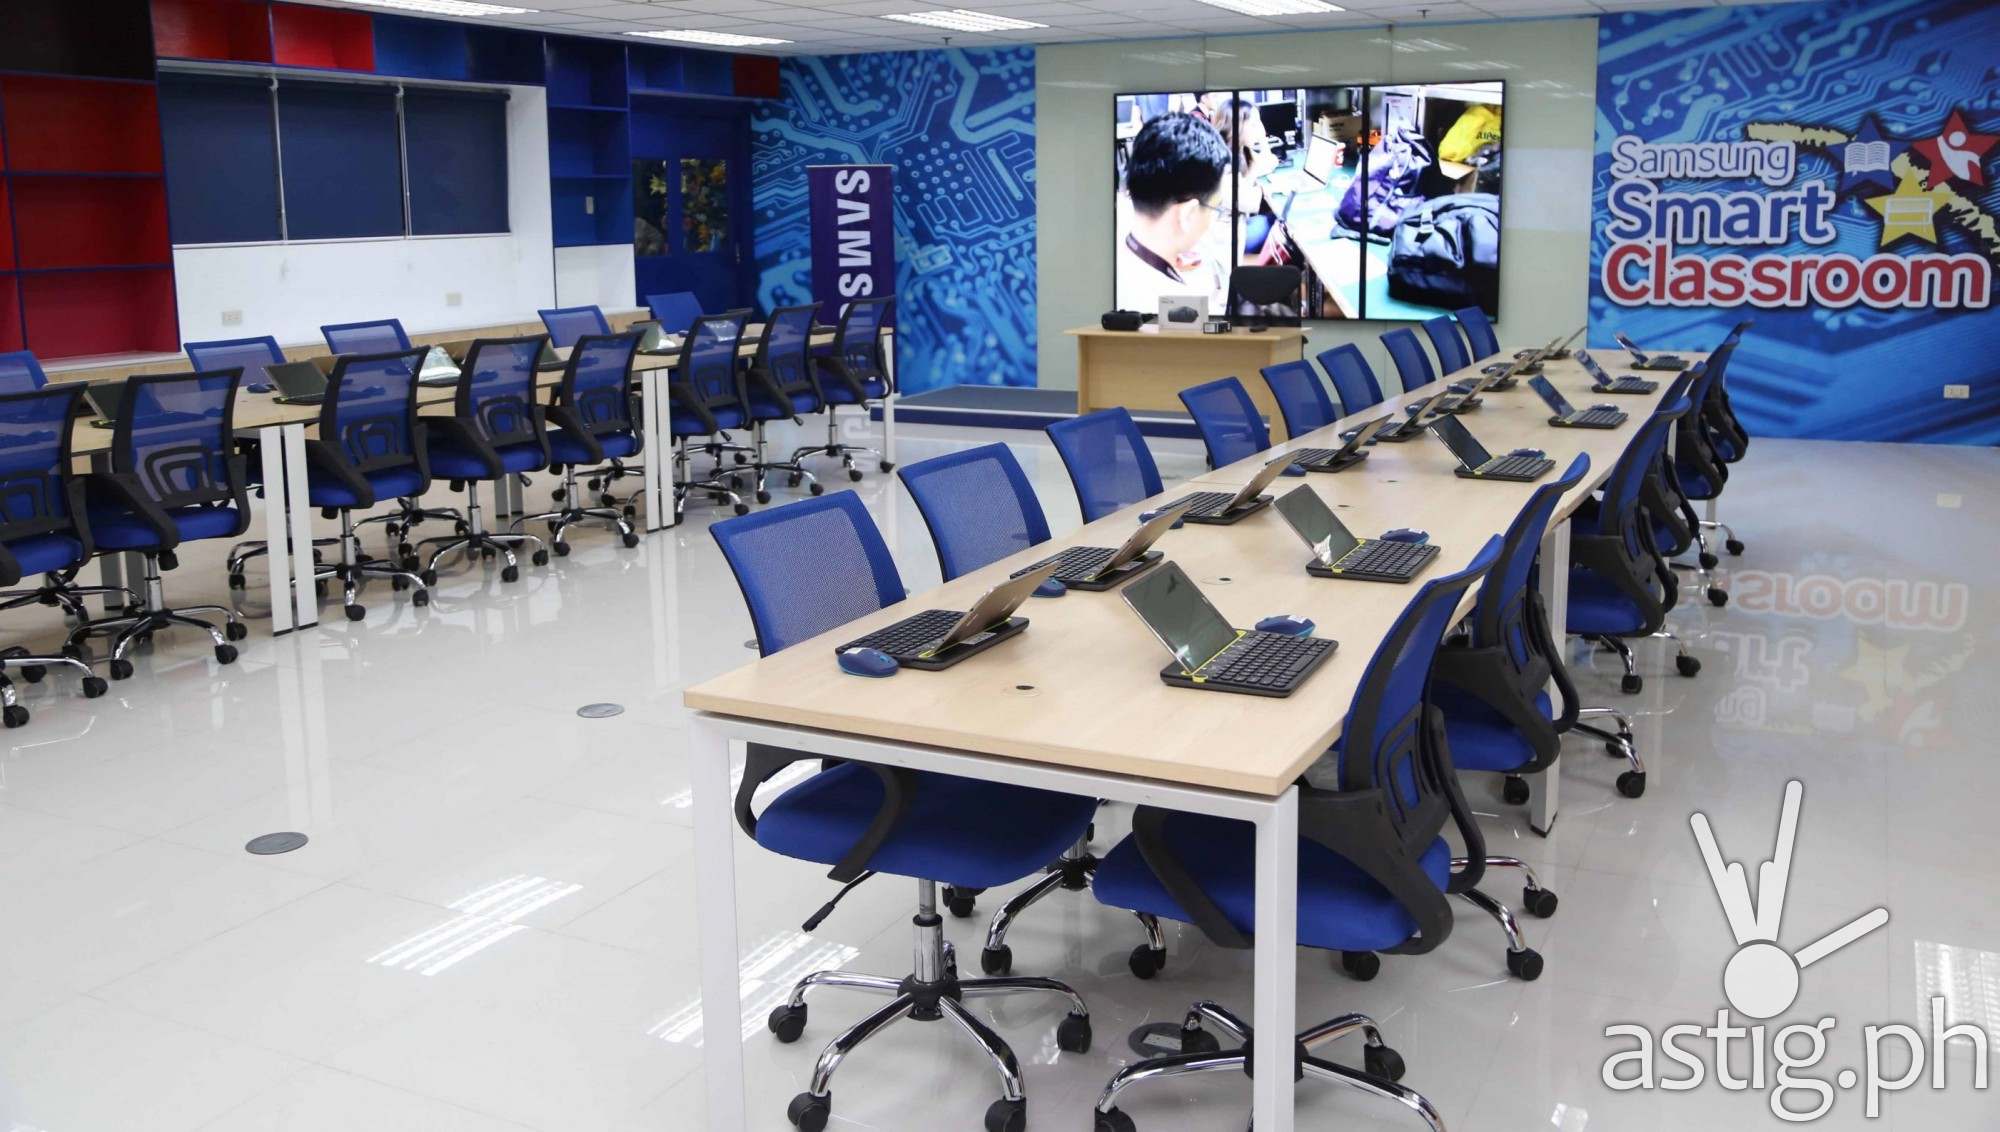 The Samsung SMART classroom is open to college engineering students and senior high school students in the ICT track.